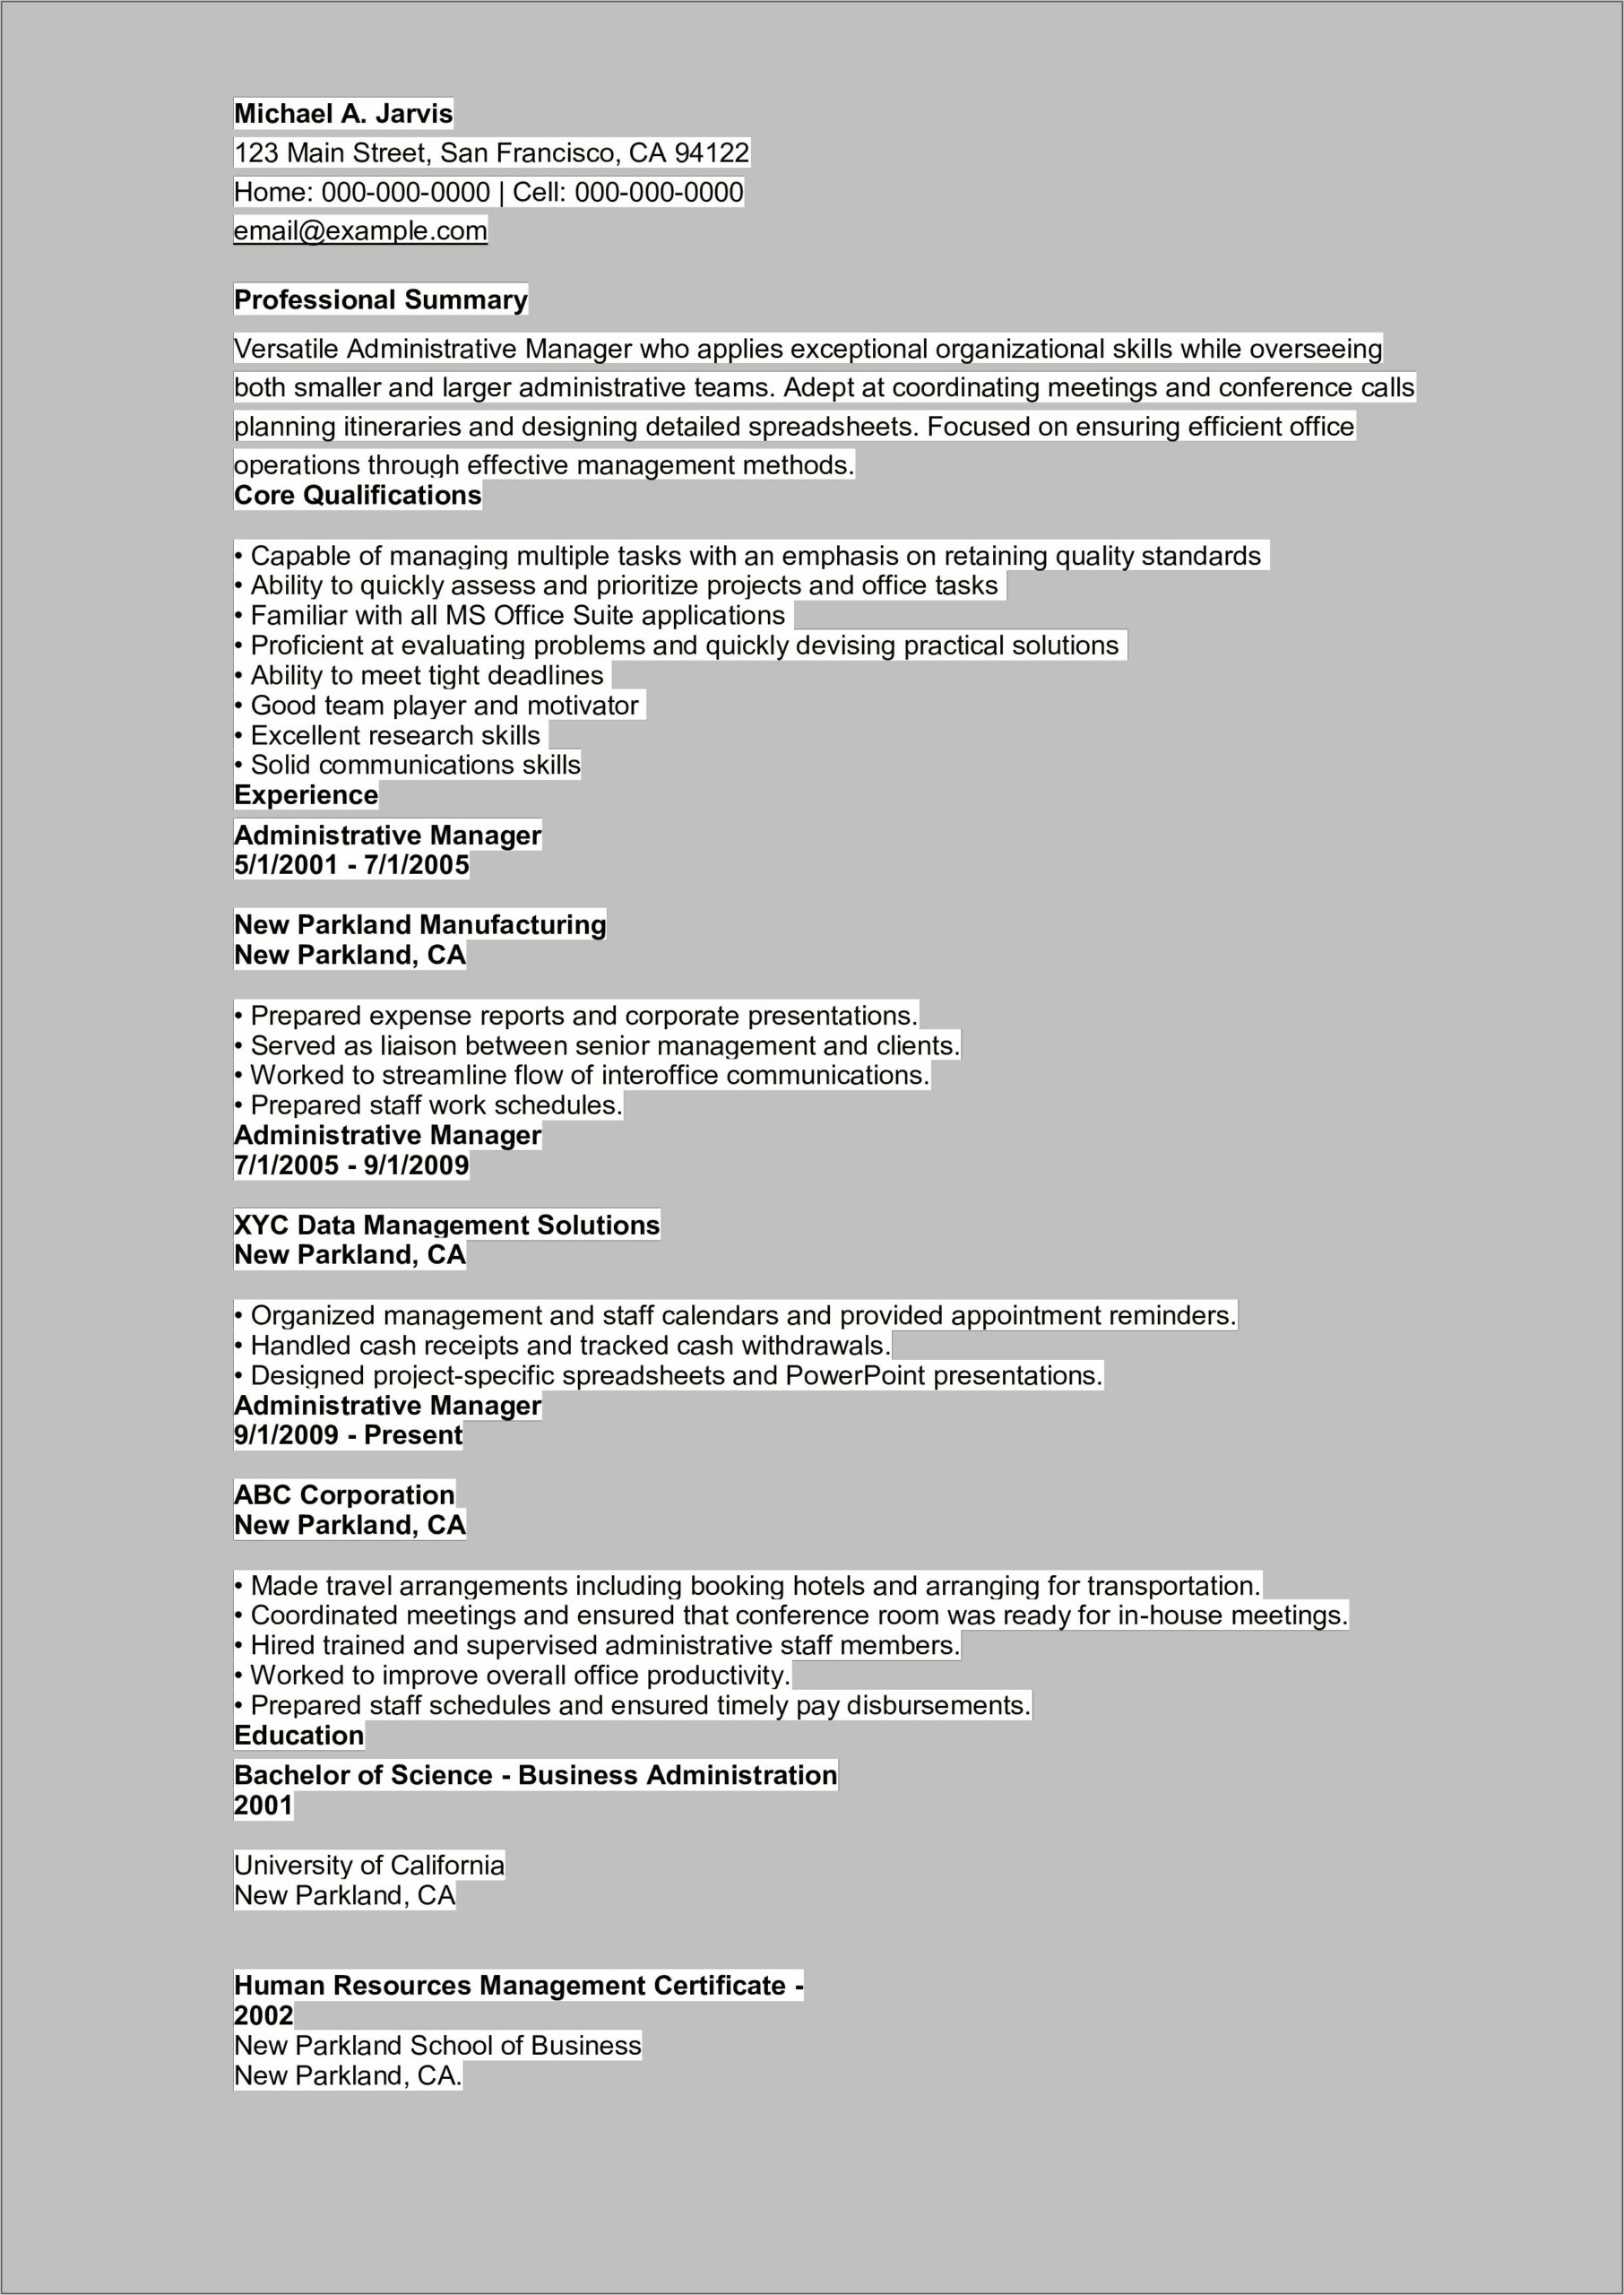 Skills For Administrative Manager Resume